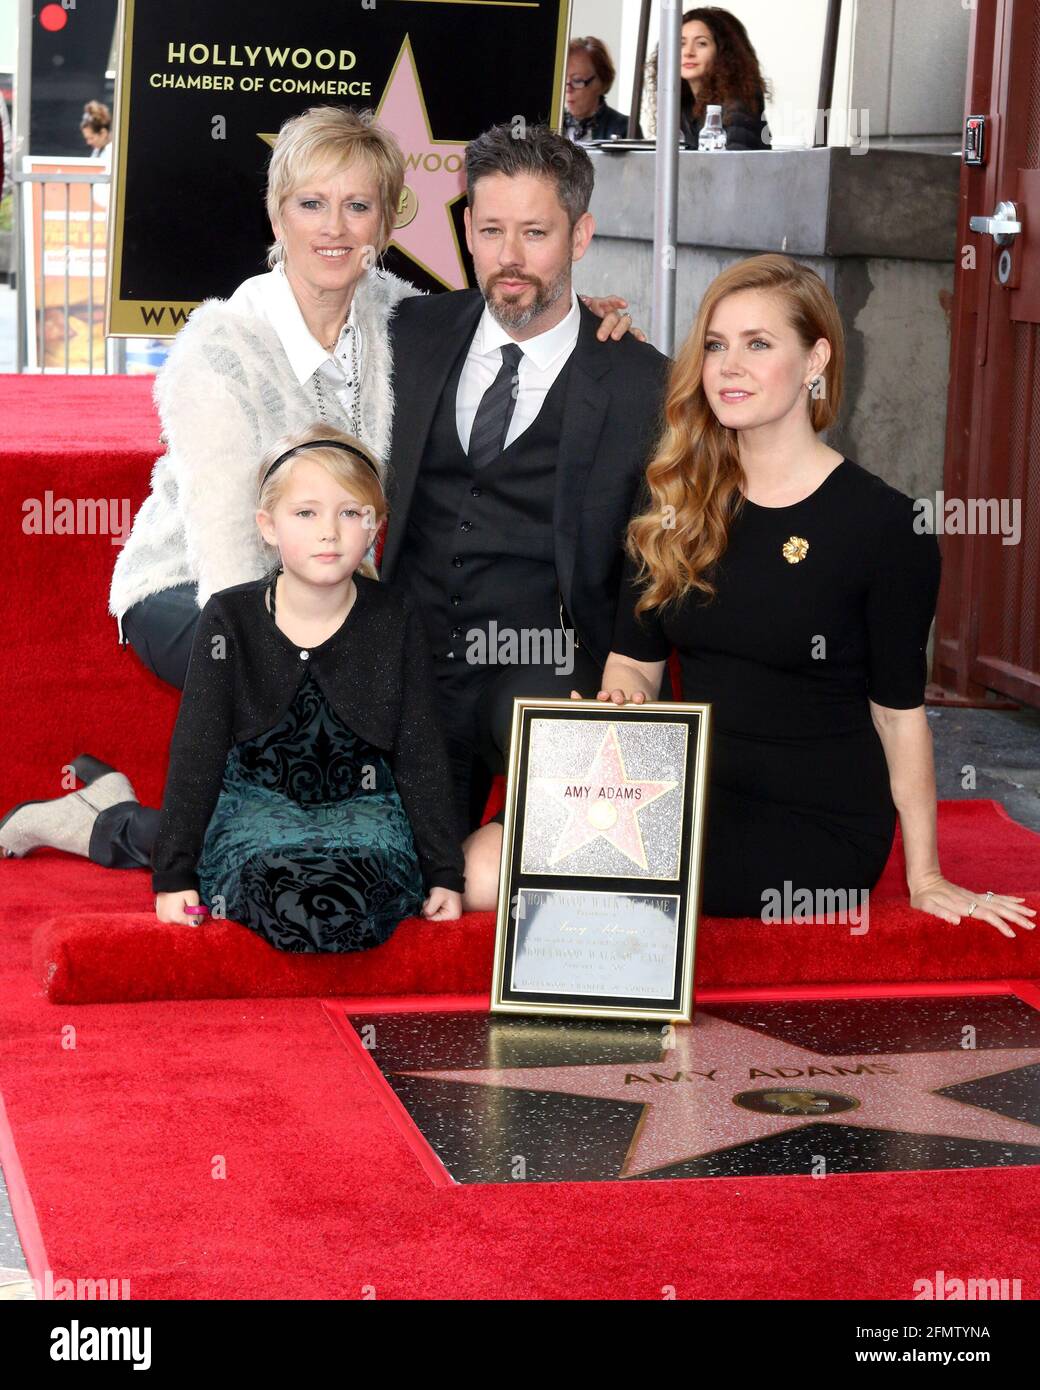 LOS ANGELES - JAN 11:  Kathryn Adams, Aviana Olea Le Gallo, Darren Le Gallo, Amy Adams at the Amy Adams Star Ceremony at Hollywood Walk of Fame on January 11, 2017 in Los Angeles, CA Stock Photo